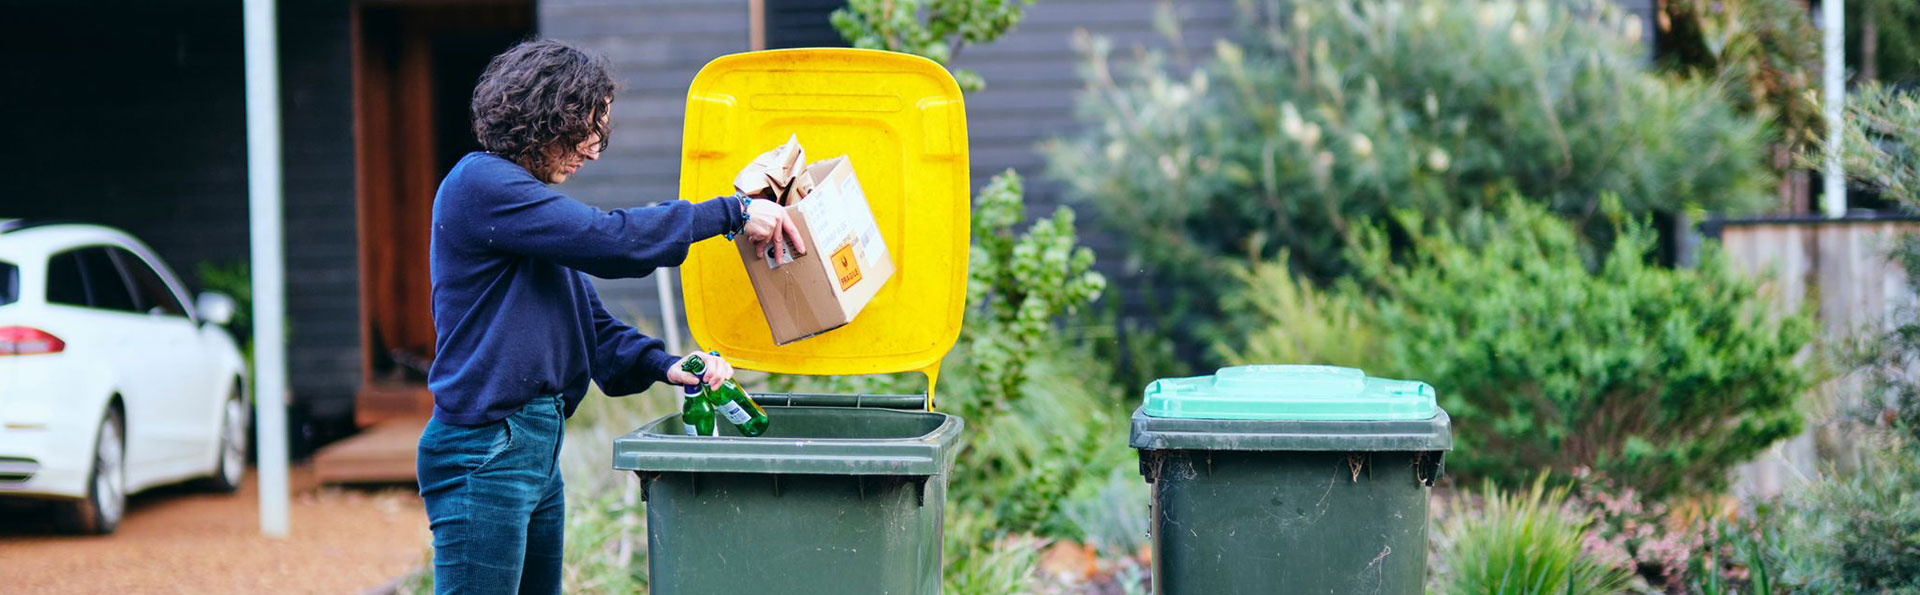 Bins, Waste and Recycling